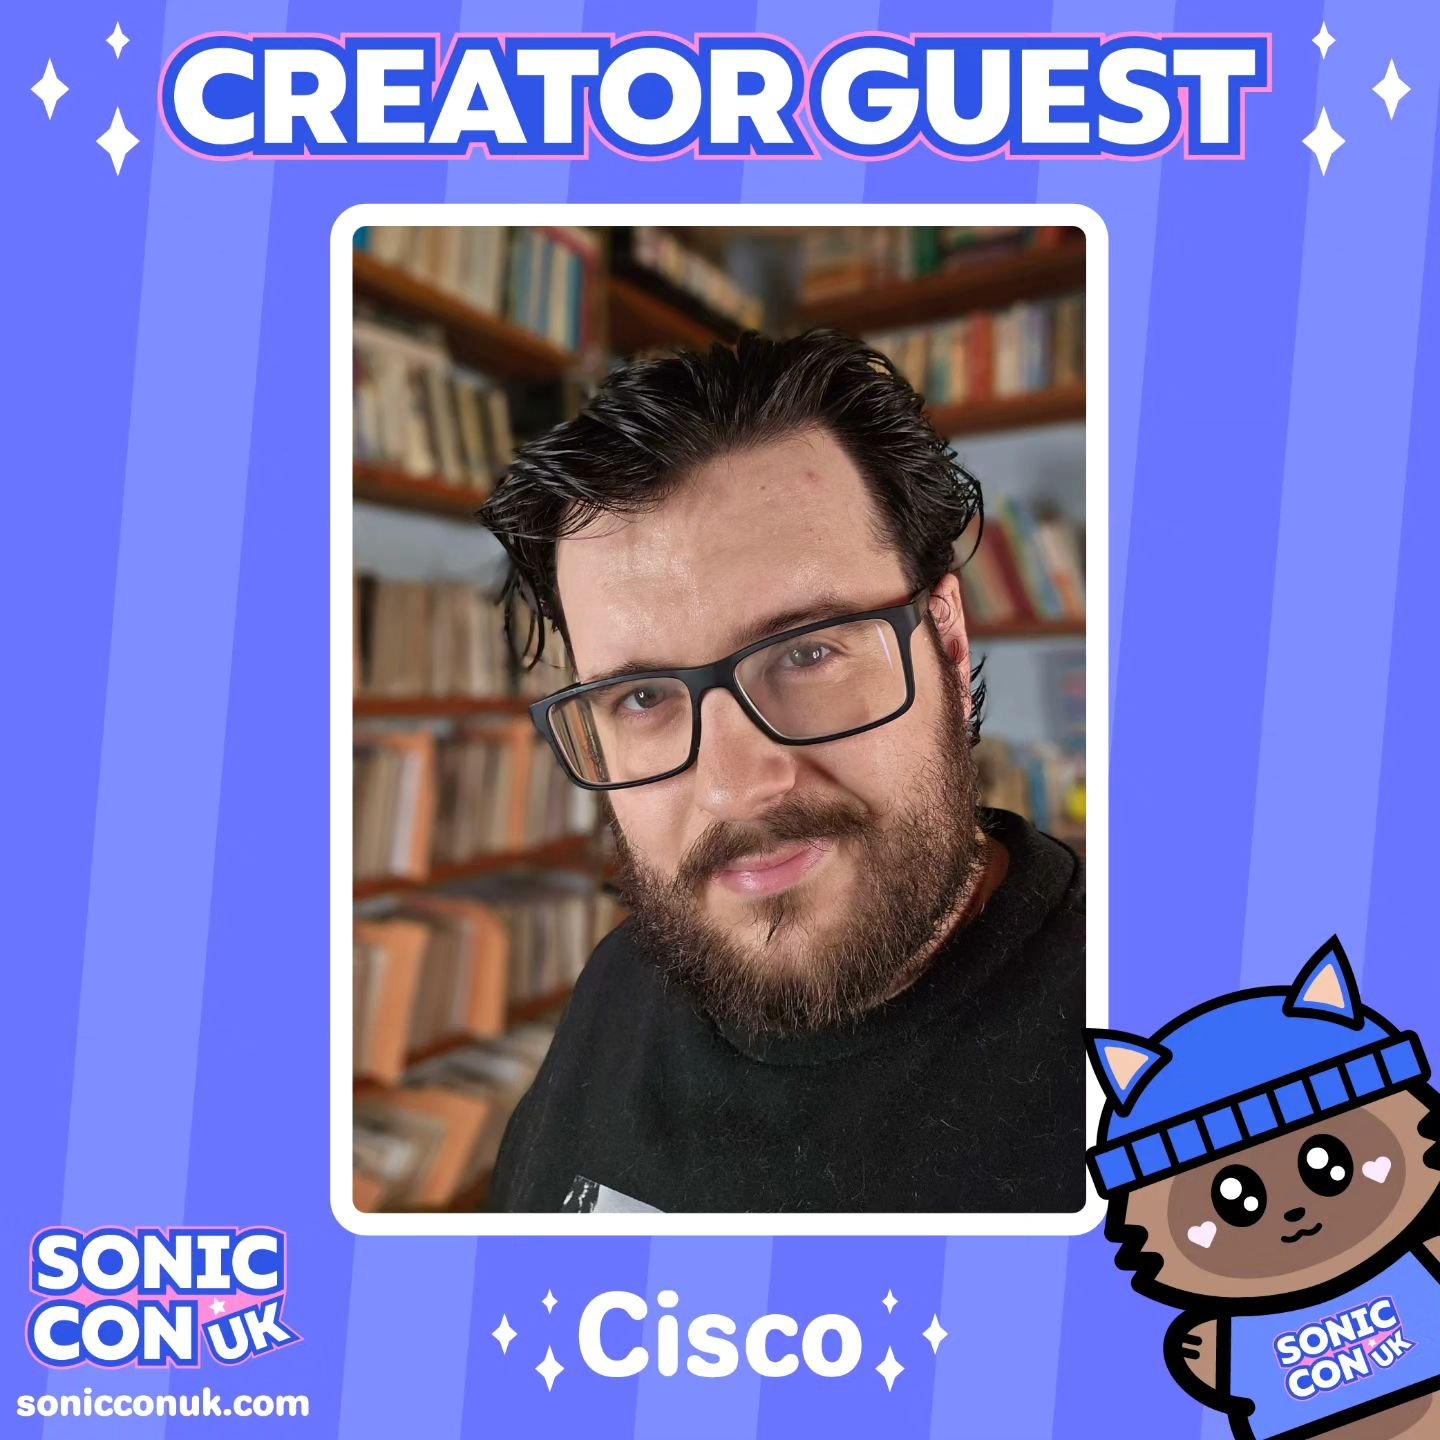 ✨ Creator guest announcement! ✨ 
We're excited to announce that Cisco will be joining us at Sonic Con UK! 💙

Cisco is a Sonic the Hedgehog content creator of over a decade ranging from discussion videos on the latest sonic content to voice acting an